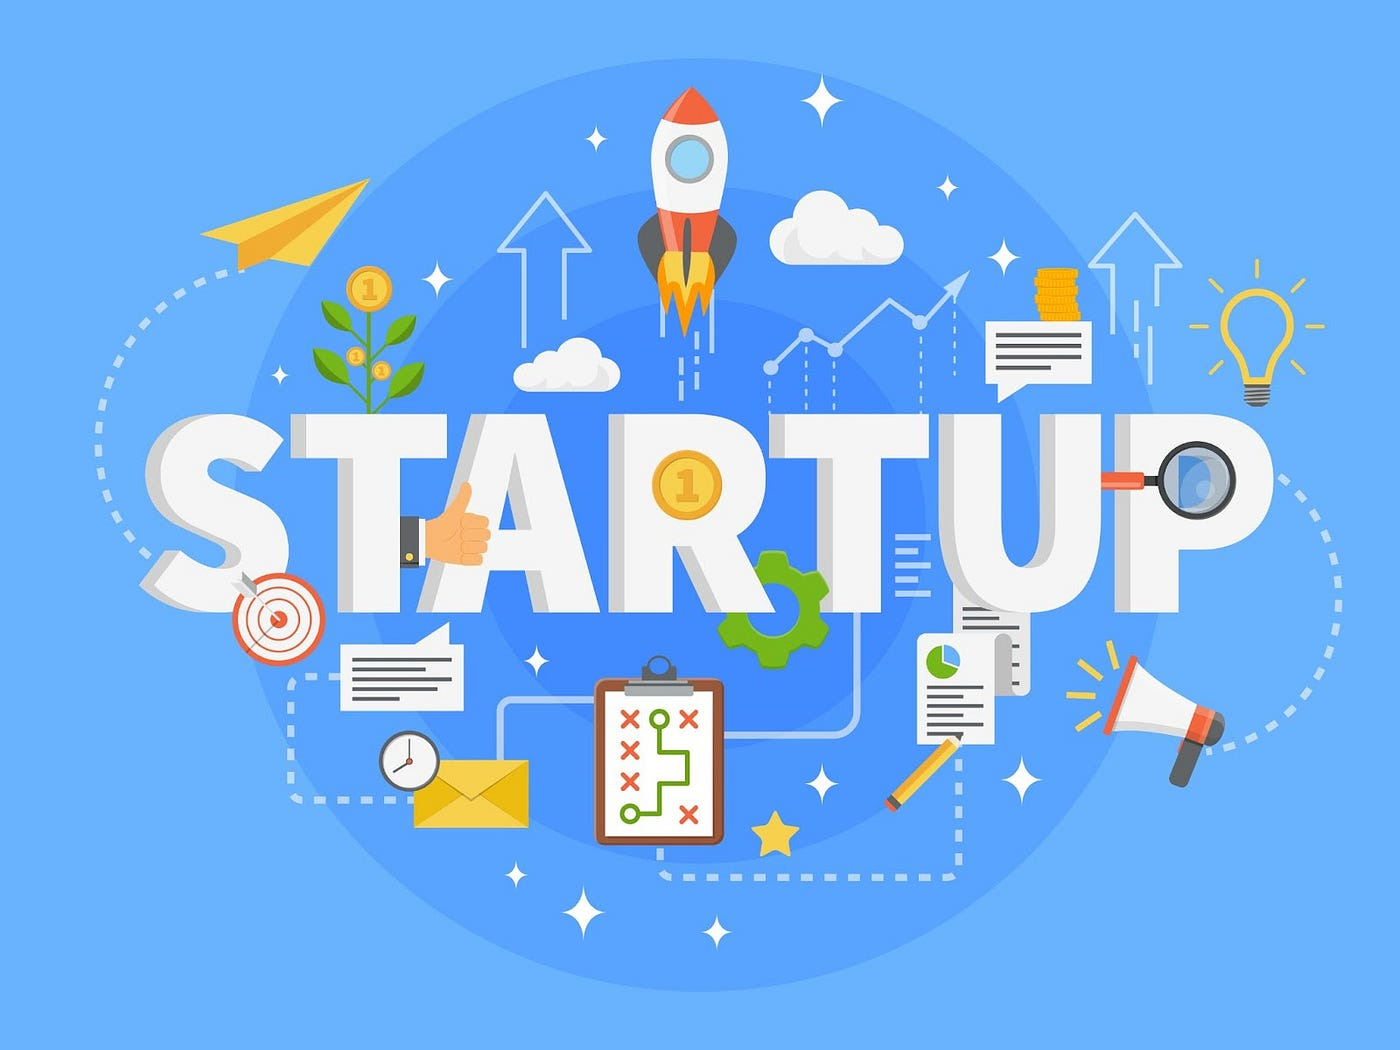 Startups are new and innovative businesses driven by a passion for problem-solving and growth.